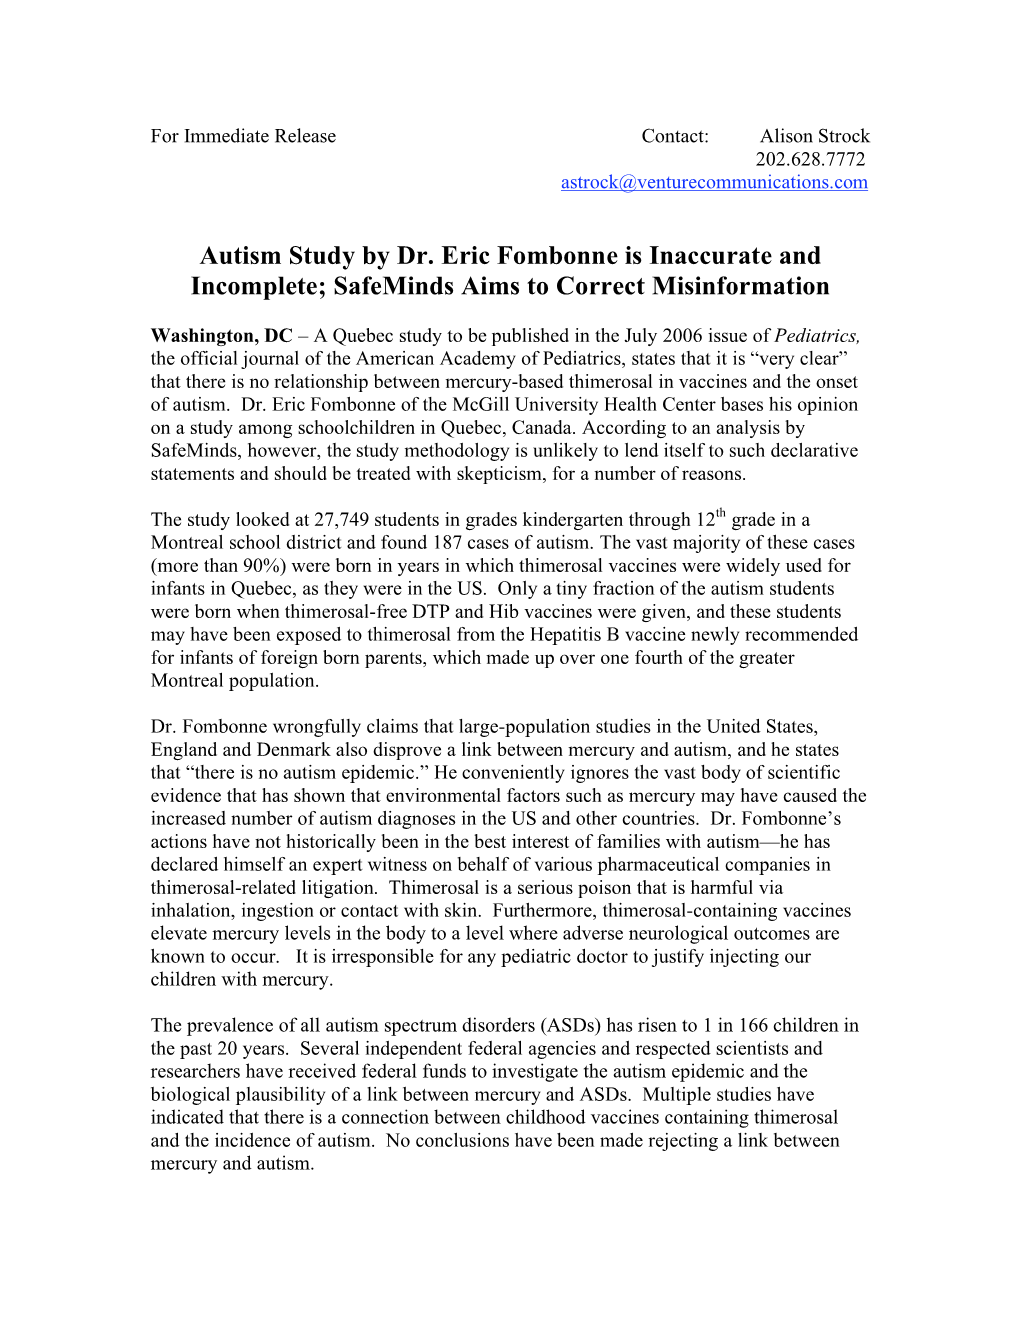 Autism Study by Dr. Eric Fombonne Is Inaccurate and Incomplete; Safeminds Aims to Correct Misinformation